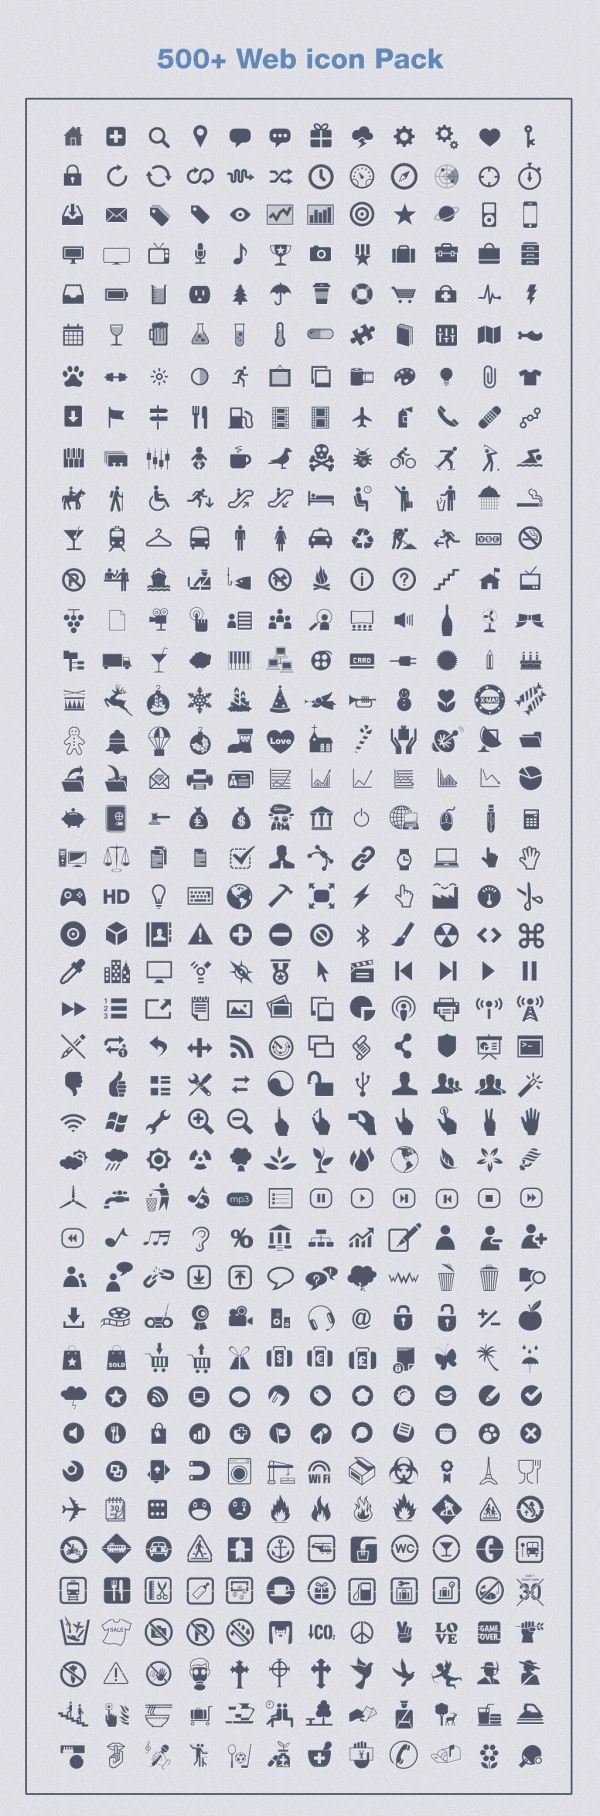 Huge collection 500 kind Web icon Pack